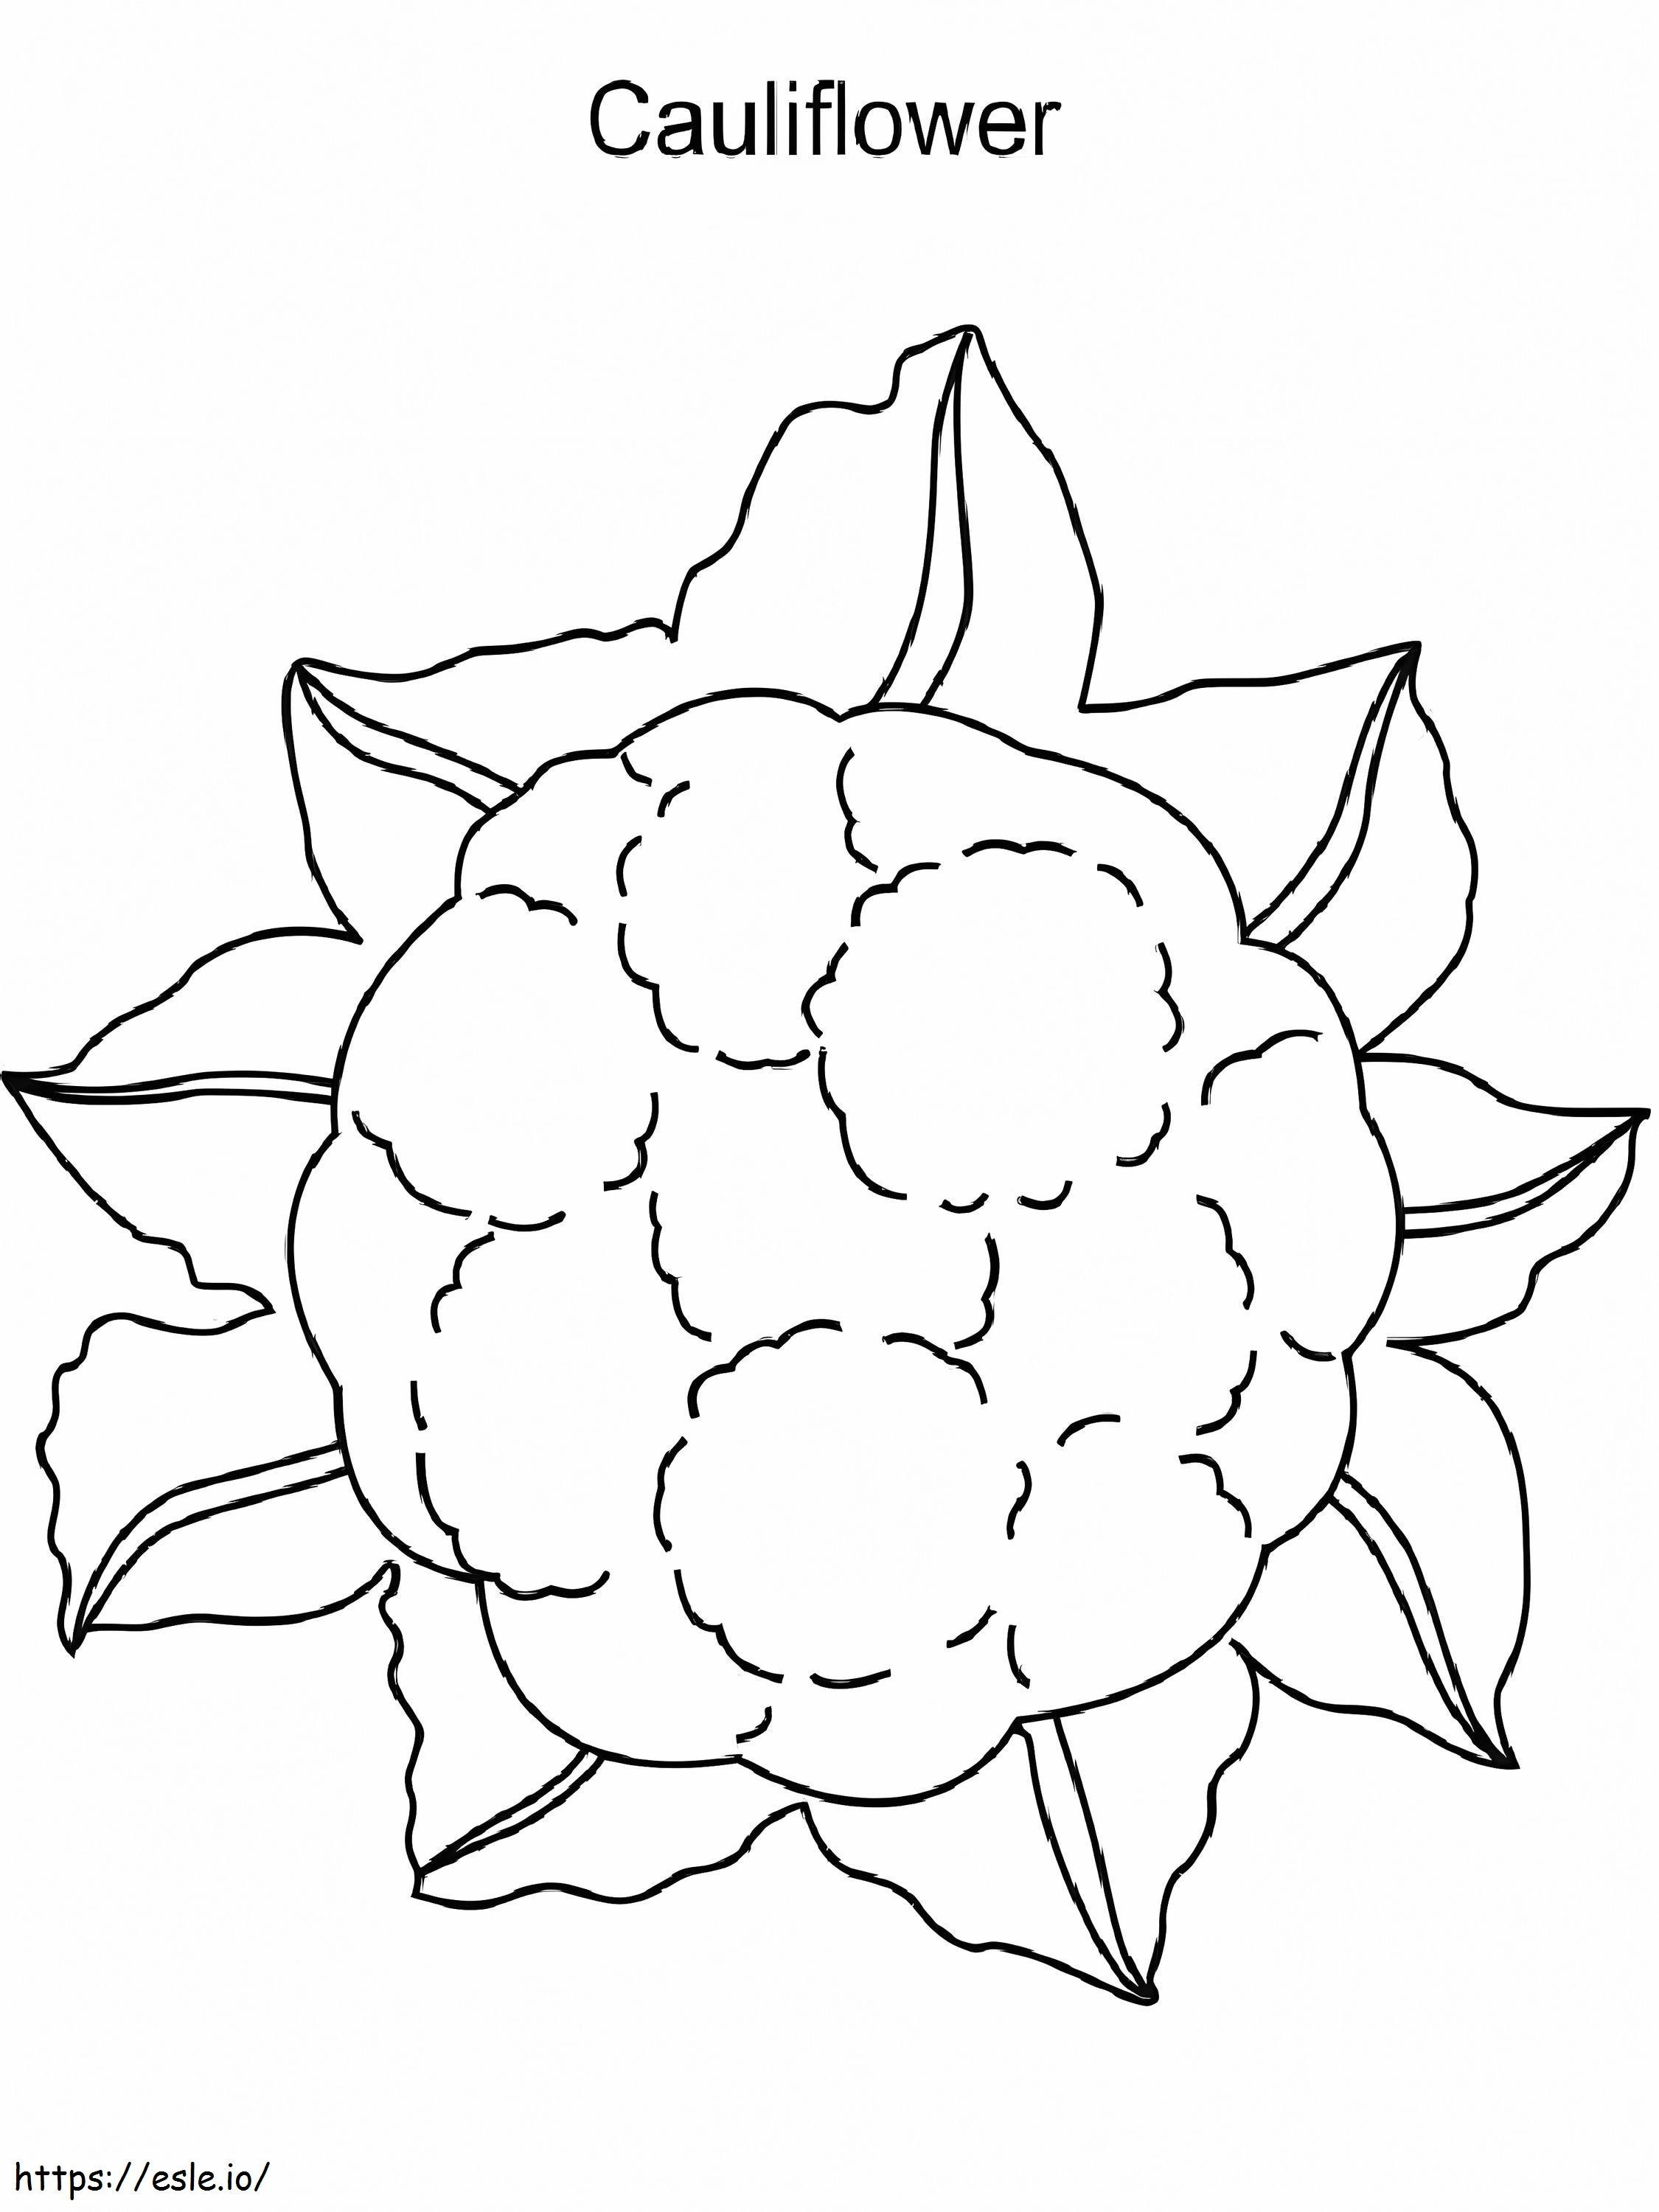 Very Easy Cauliflower coloring page